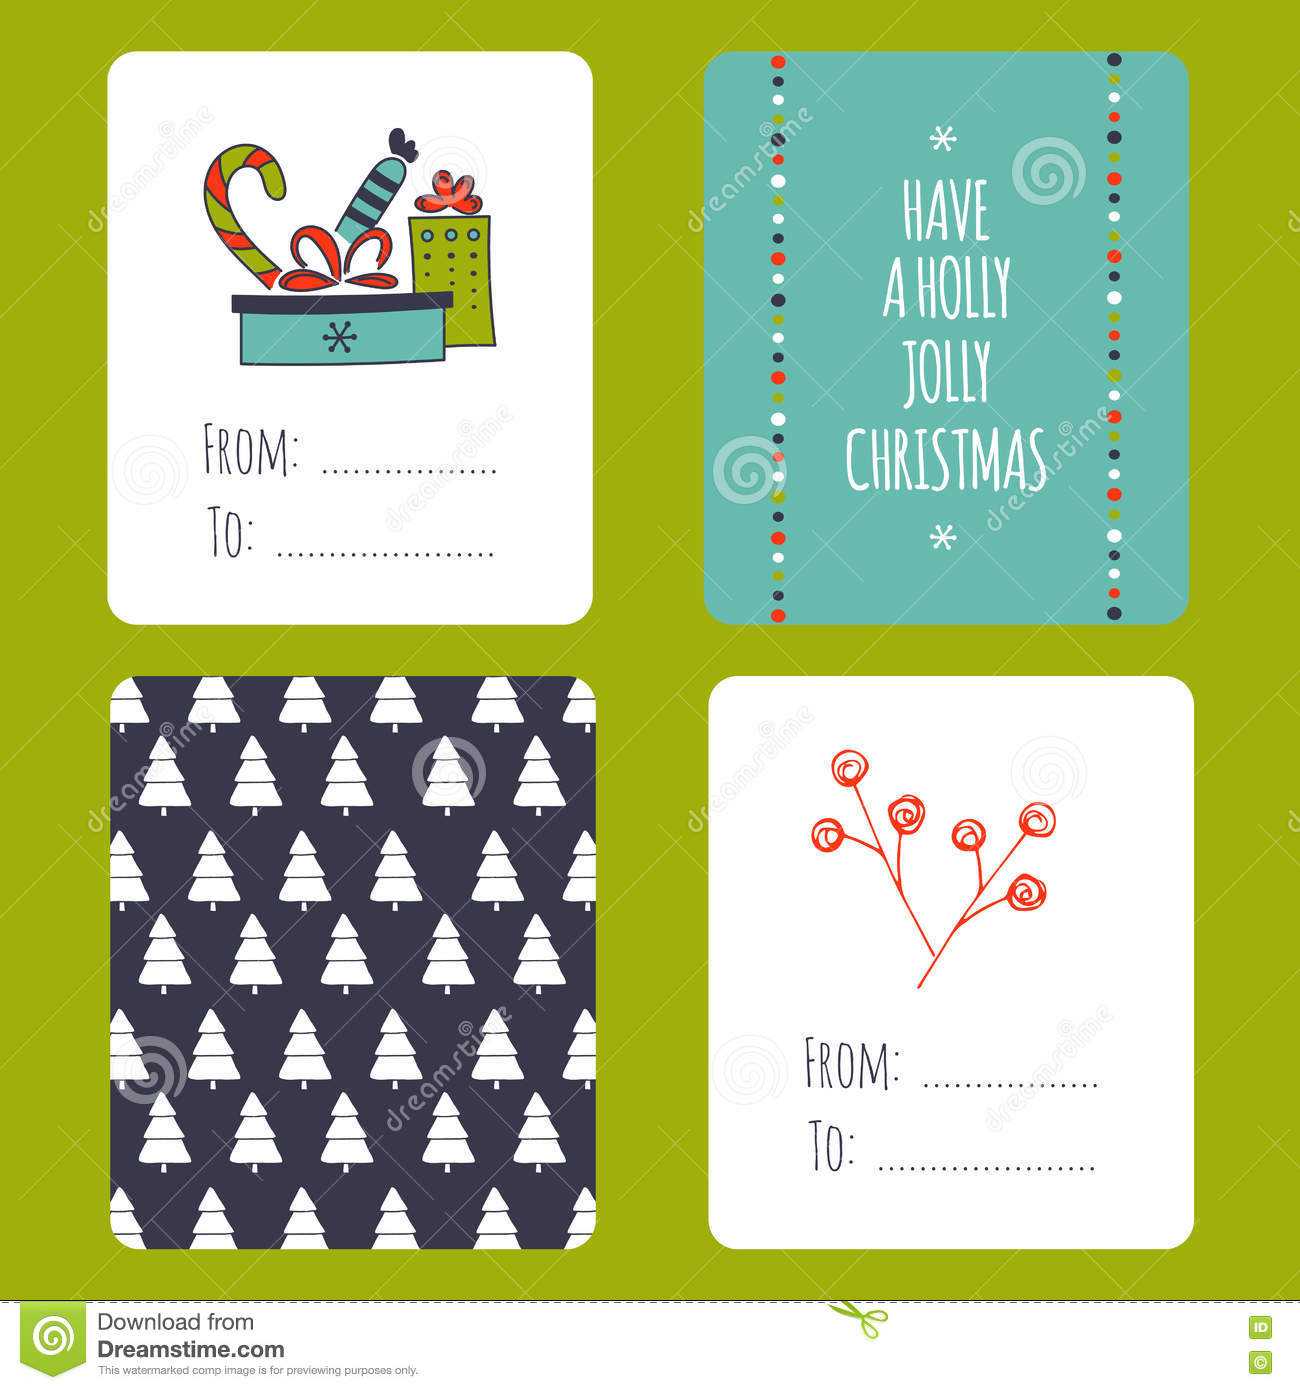 Christmas Set Of Cards Stock Vector. Illustration Of Design With Regard To Small Greeting Card Template